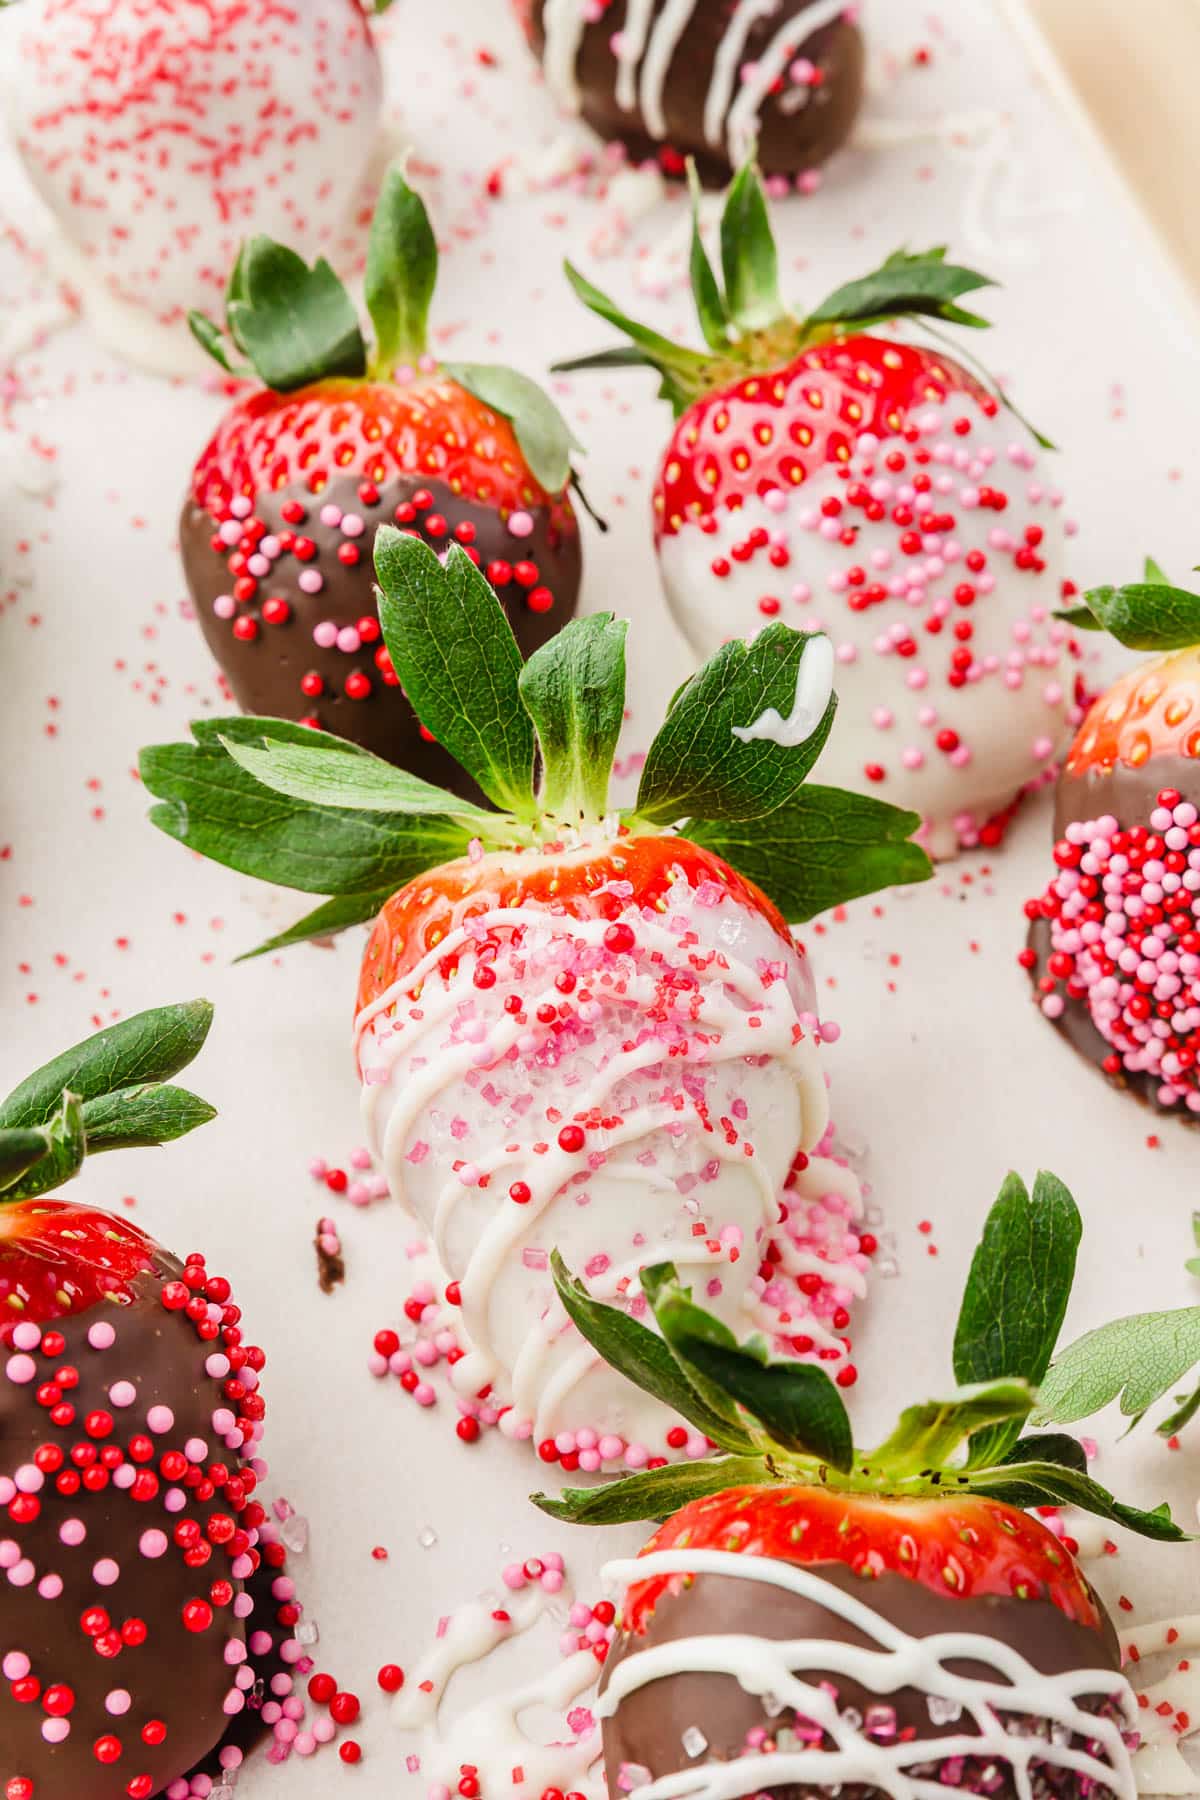 A baking sheet lined with parchment paper with strawberries that have been dipped in white chocolate or dark chocolate and decorated with pink and red sprinkles.